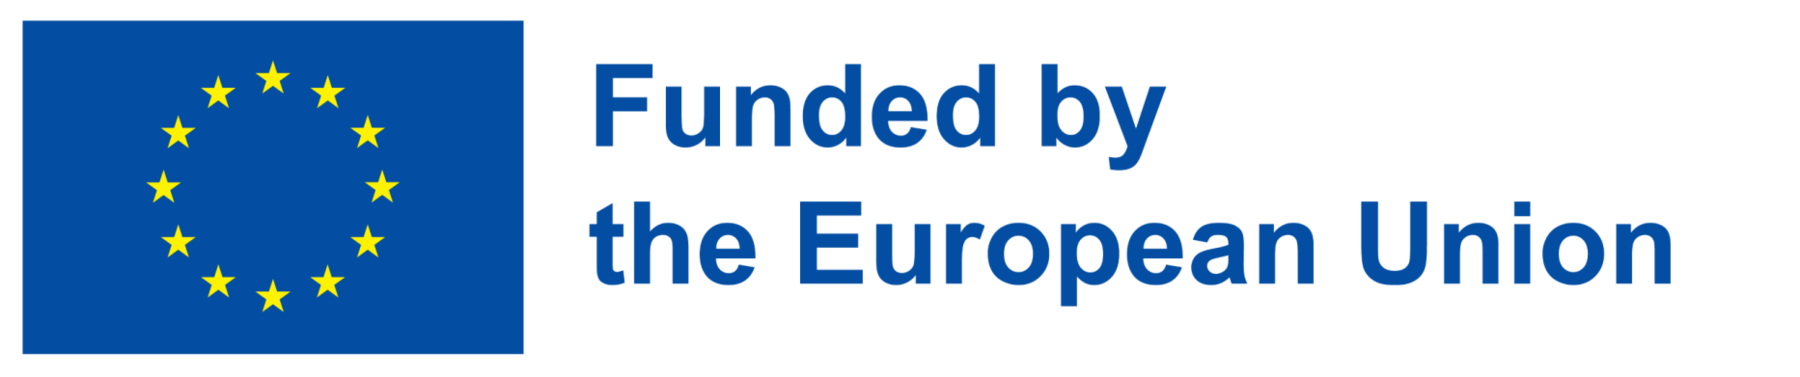 Projekte LKÖ EU Logo Funded by the European Union.png